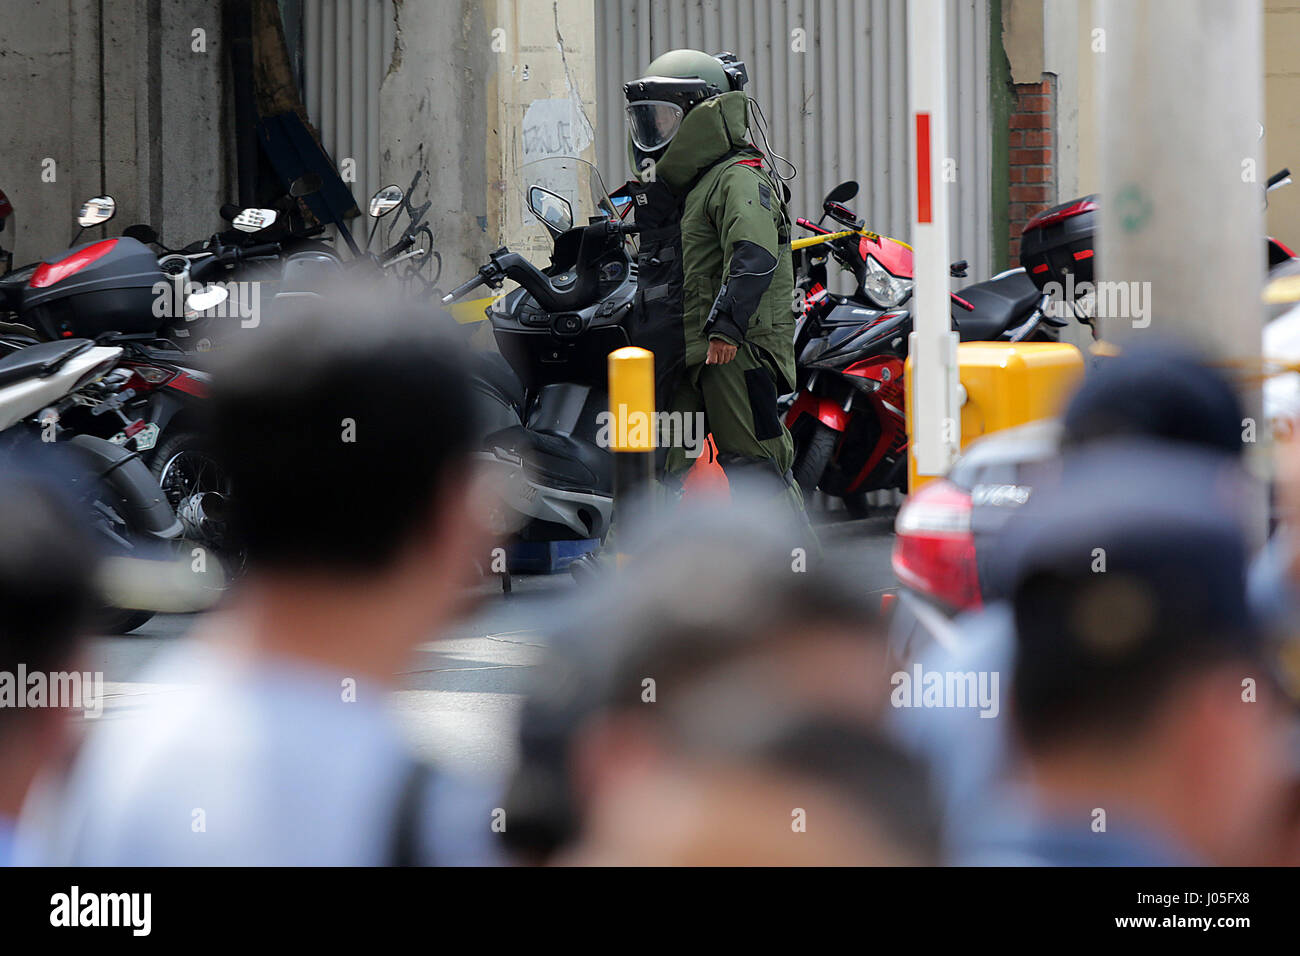 Quezon City, Philippines. 11th Apr, 2017. A member of the Philippine National Police-Explosives and Ordnance Division (PNP-EOD) wearing a bomb suit participates in an anti-bomb drill at a bus station in Quezon City, the Philippines, on April 11, 2017. The Philippine National Police (PNP) said on Monday that it has received information of a potential terrorist threat in central Philippines. Credit: Rouelle Umali/Xinhua/Alamy Live News Stock Photo